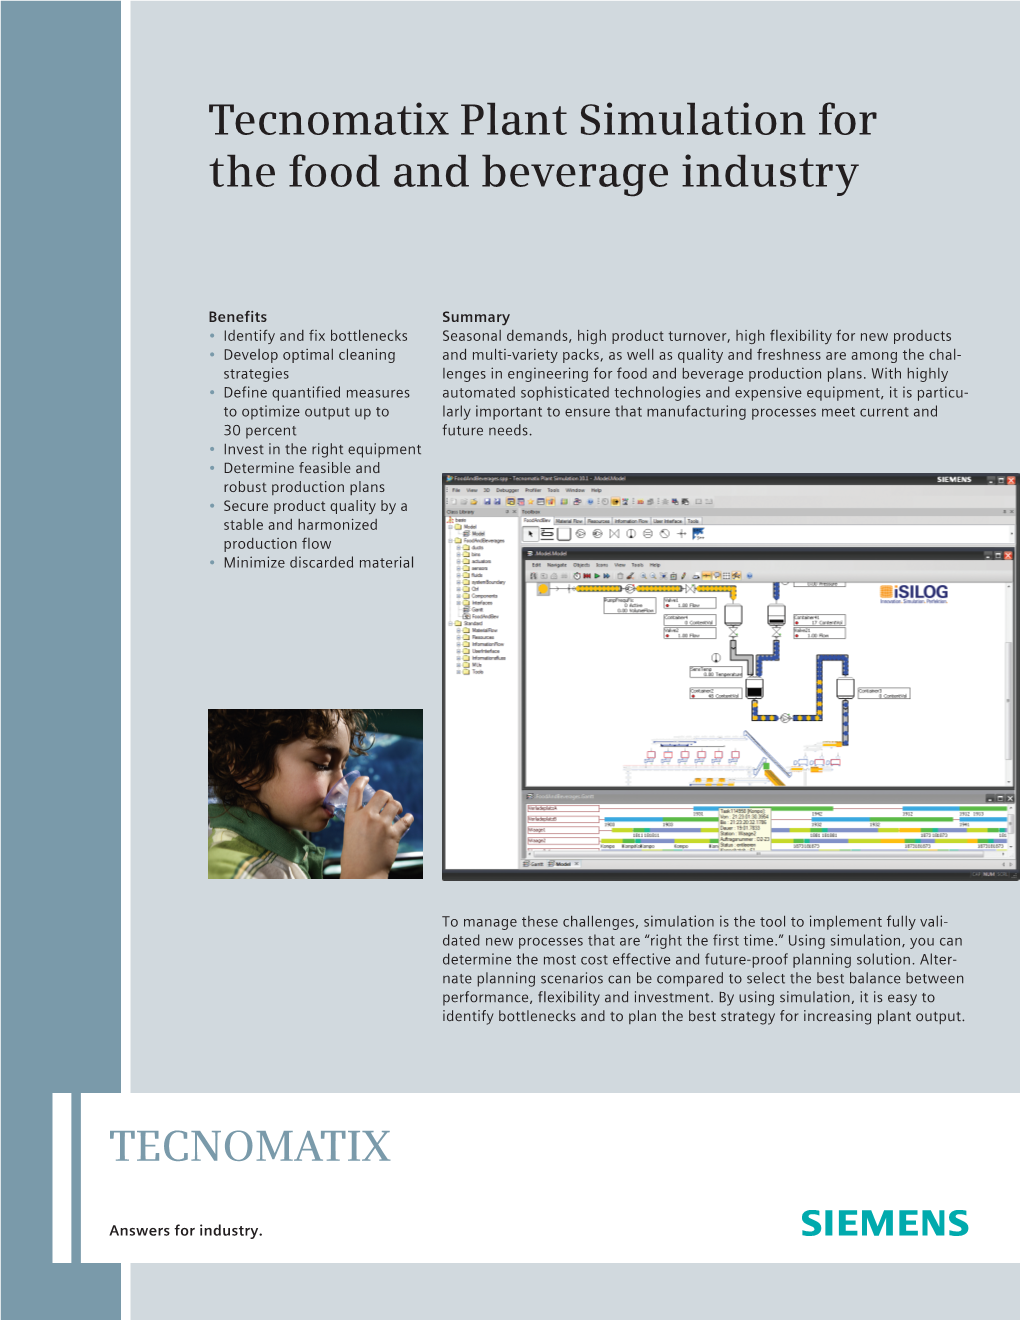 Tecnomatix Plant Simulation for the Food and Beverage Industry Fact Sheet